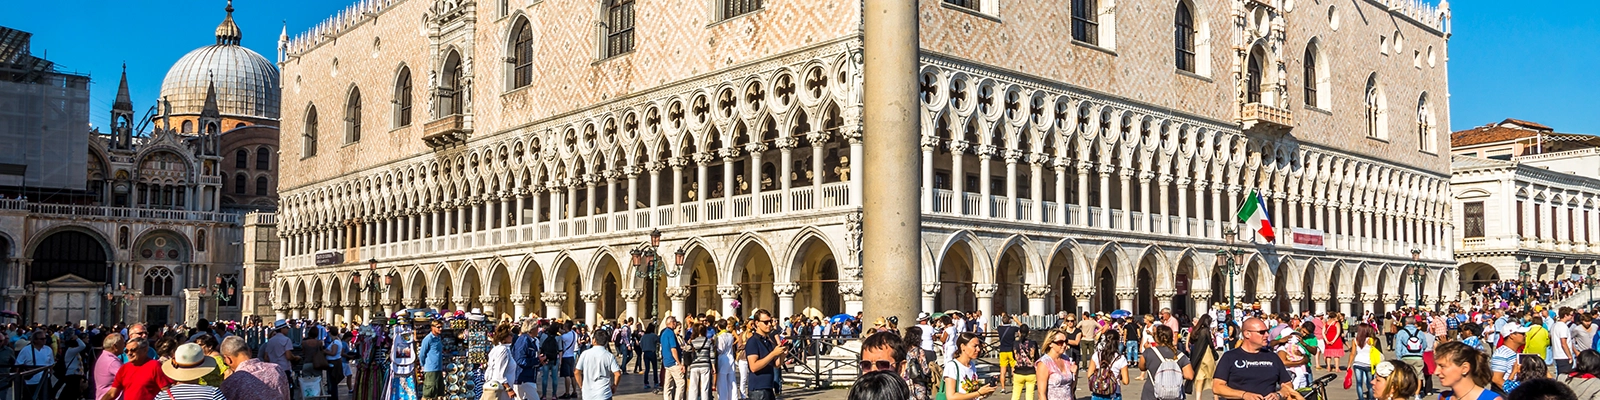 Scenic view of the stunning Doge's Palace in Venice, Italy